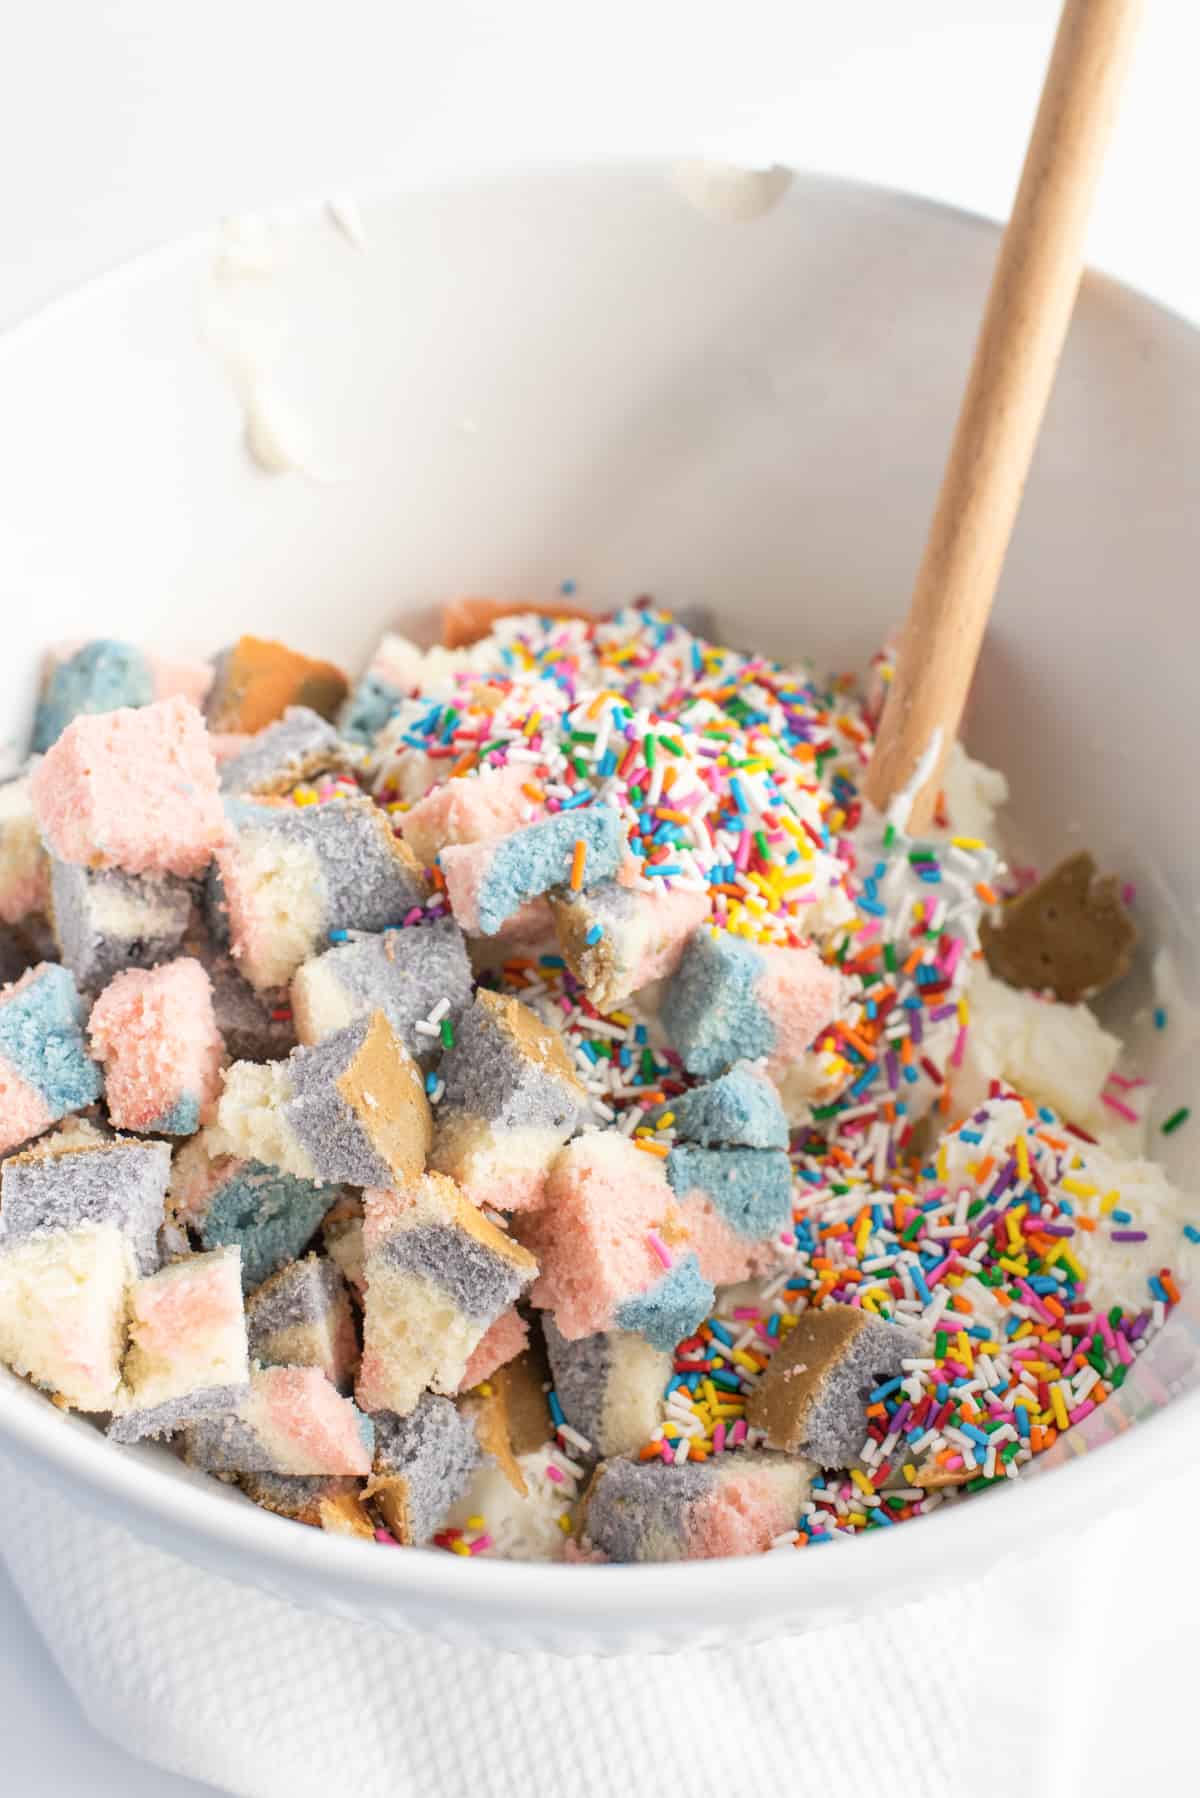 Mining bowl filled with vanilla ice cream, rainbow sprinkles, and chunks of cake